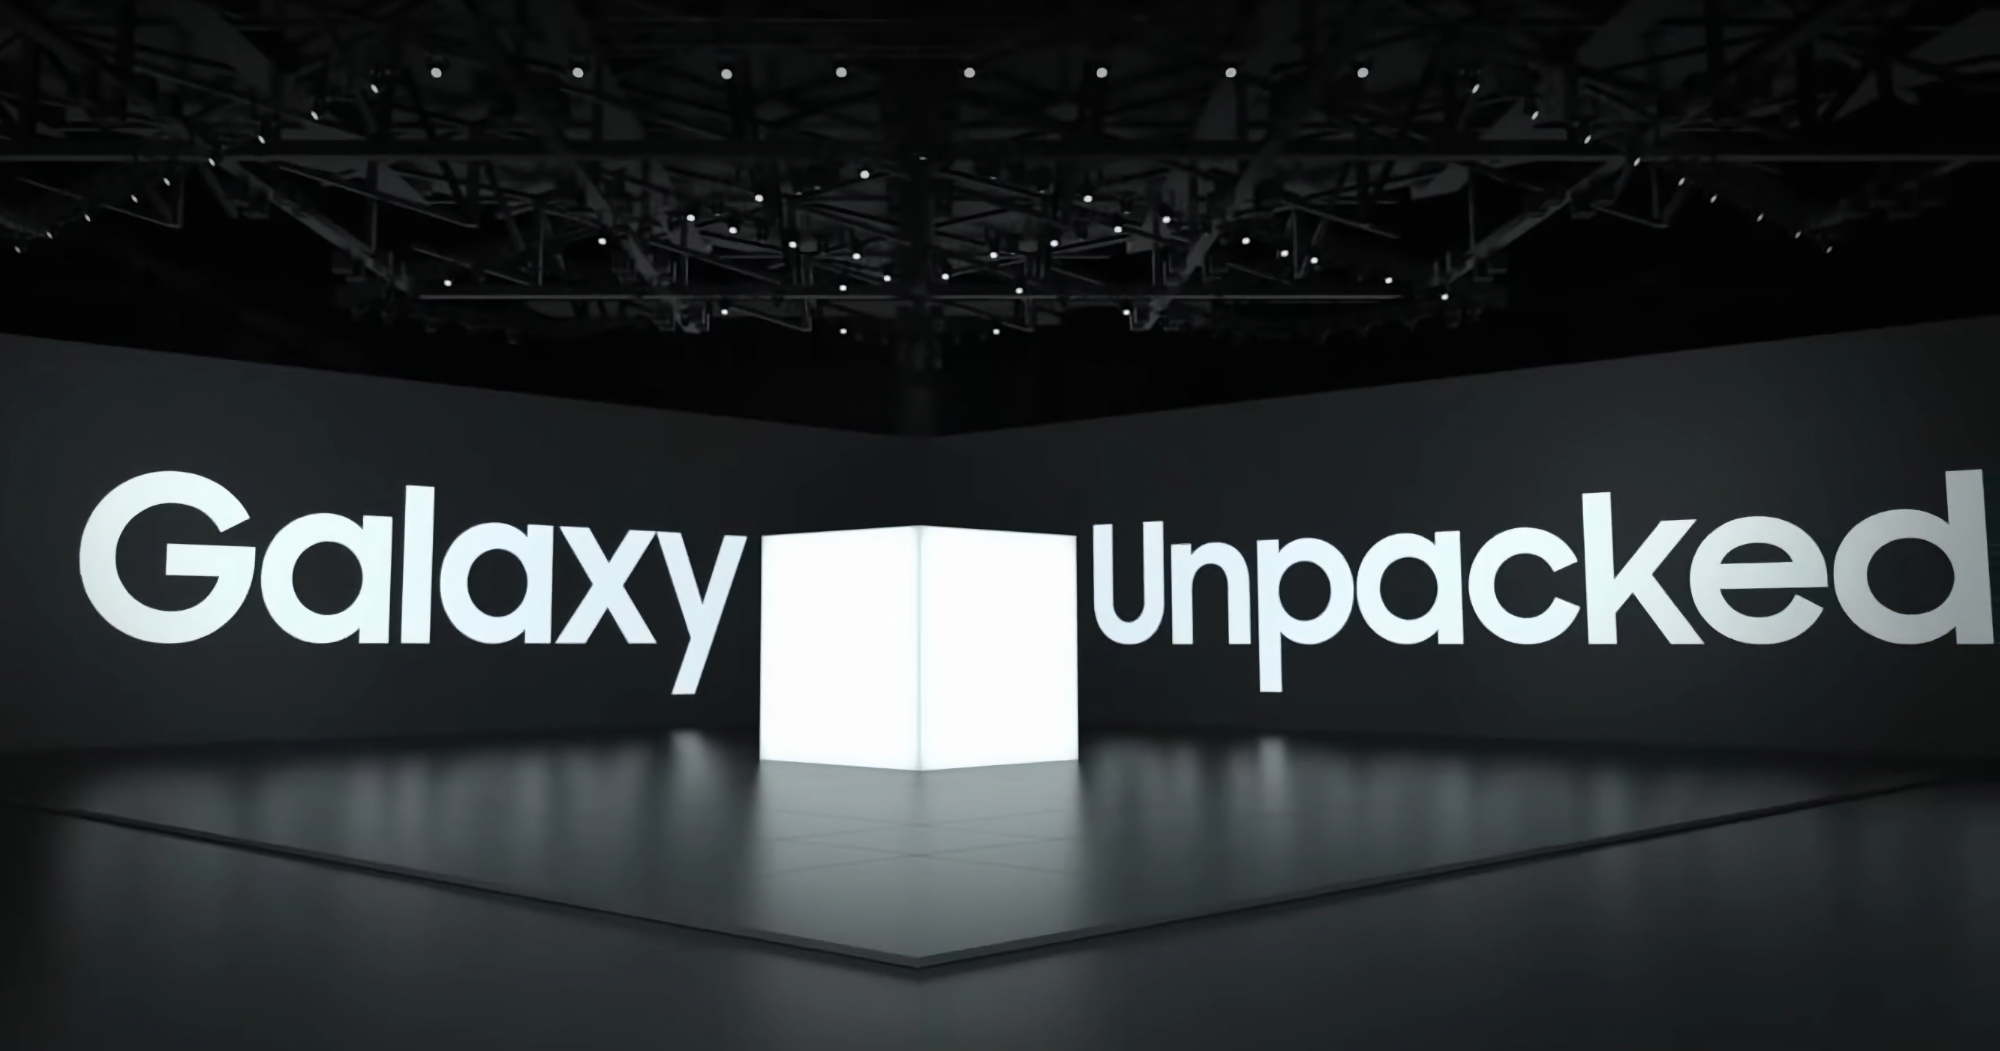 Yonhap: Samsung will hold the next Galaxy Unpacked presentation in July, with the event taking place in Paris